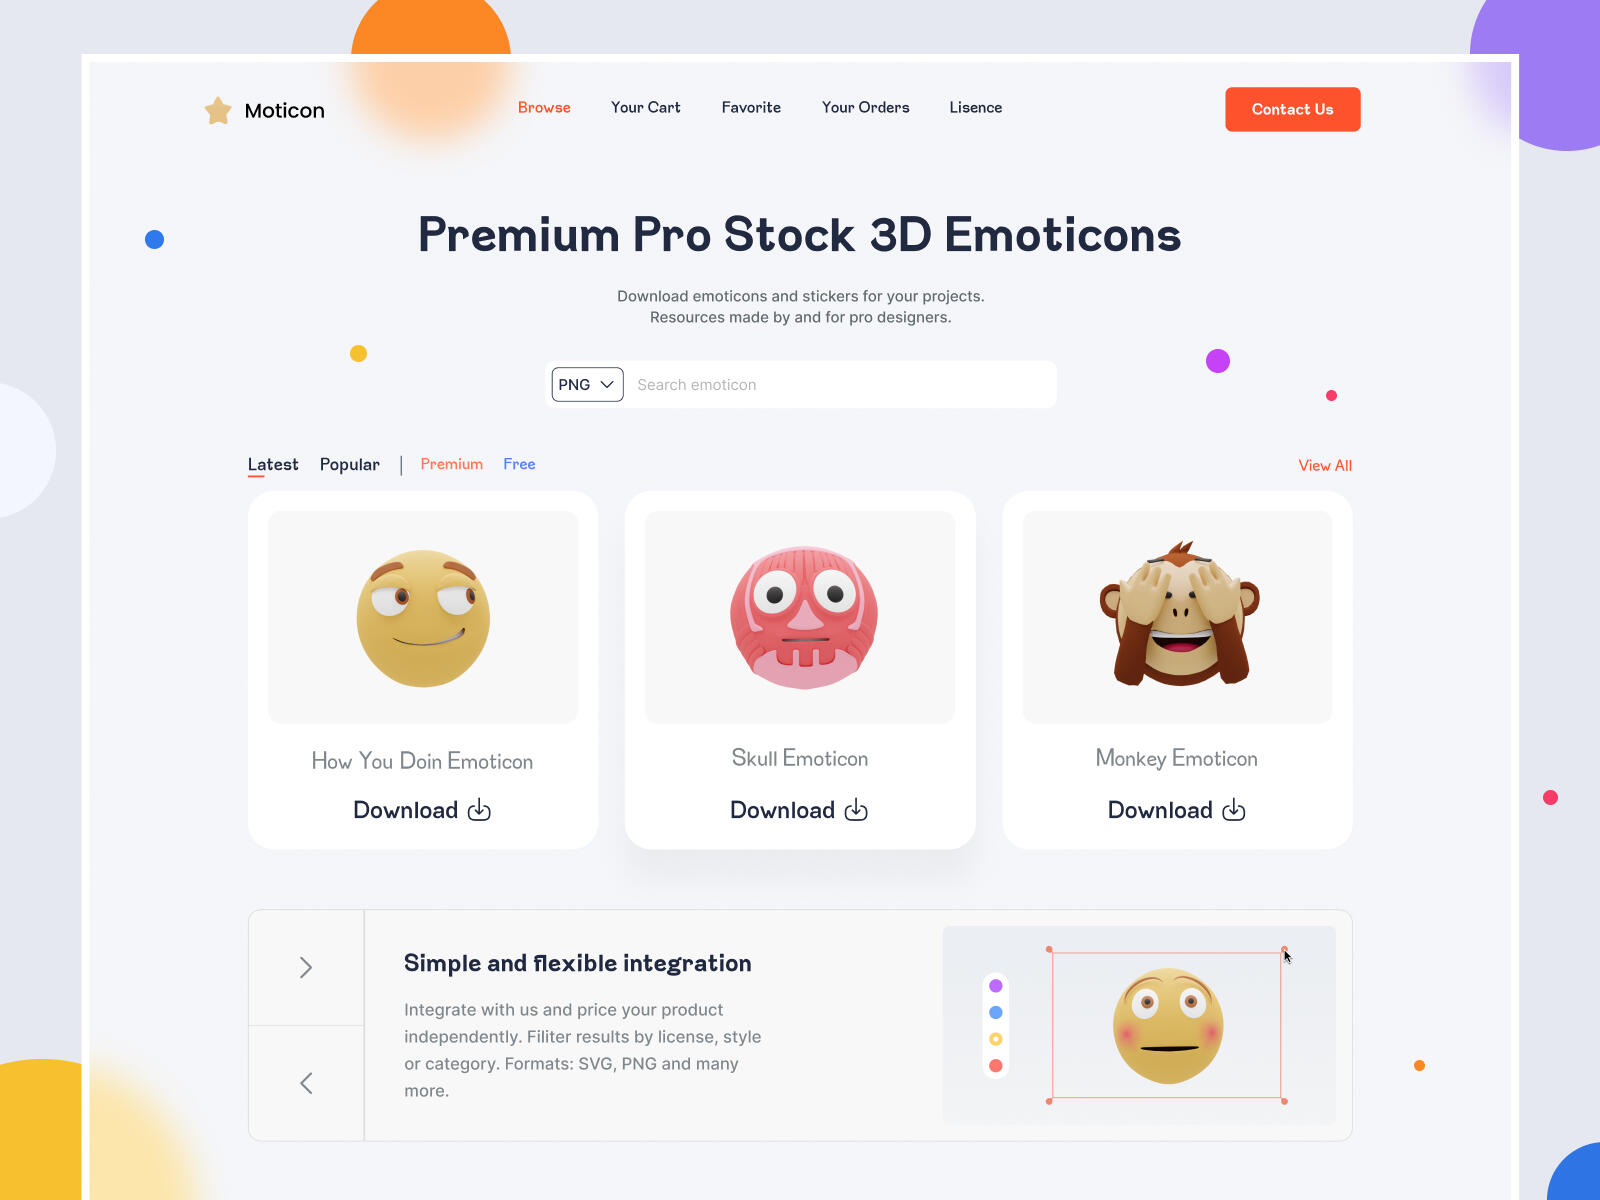 Sample of UI with animated 3D emojis